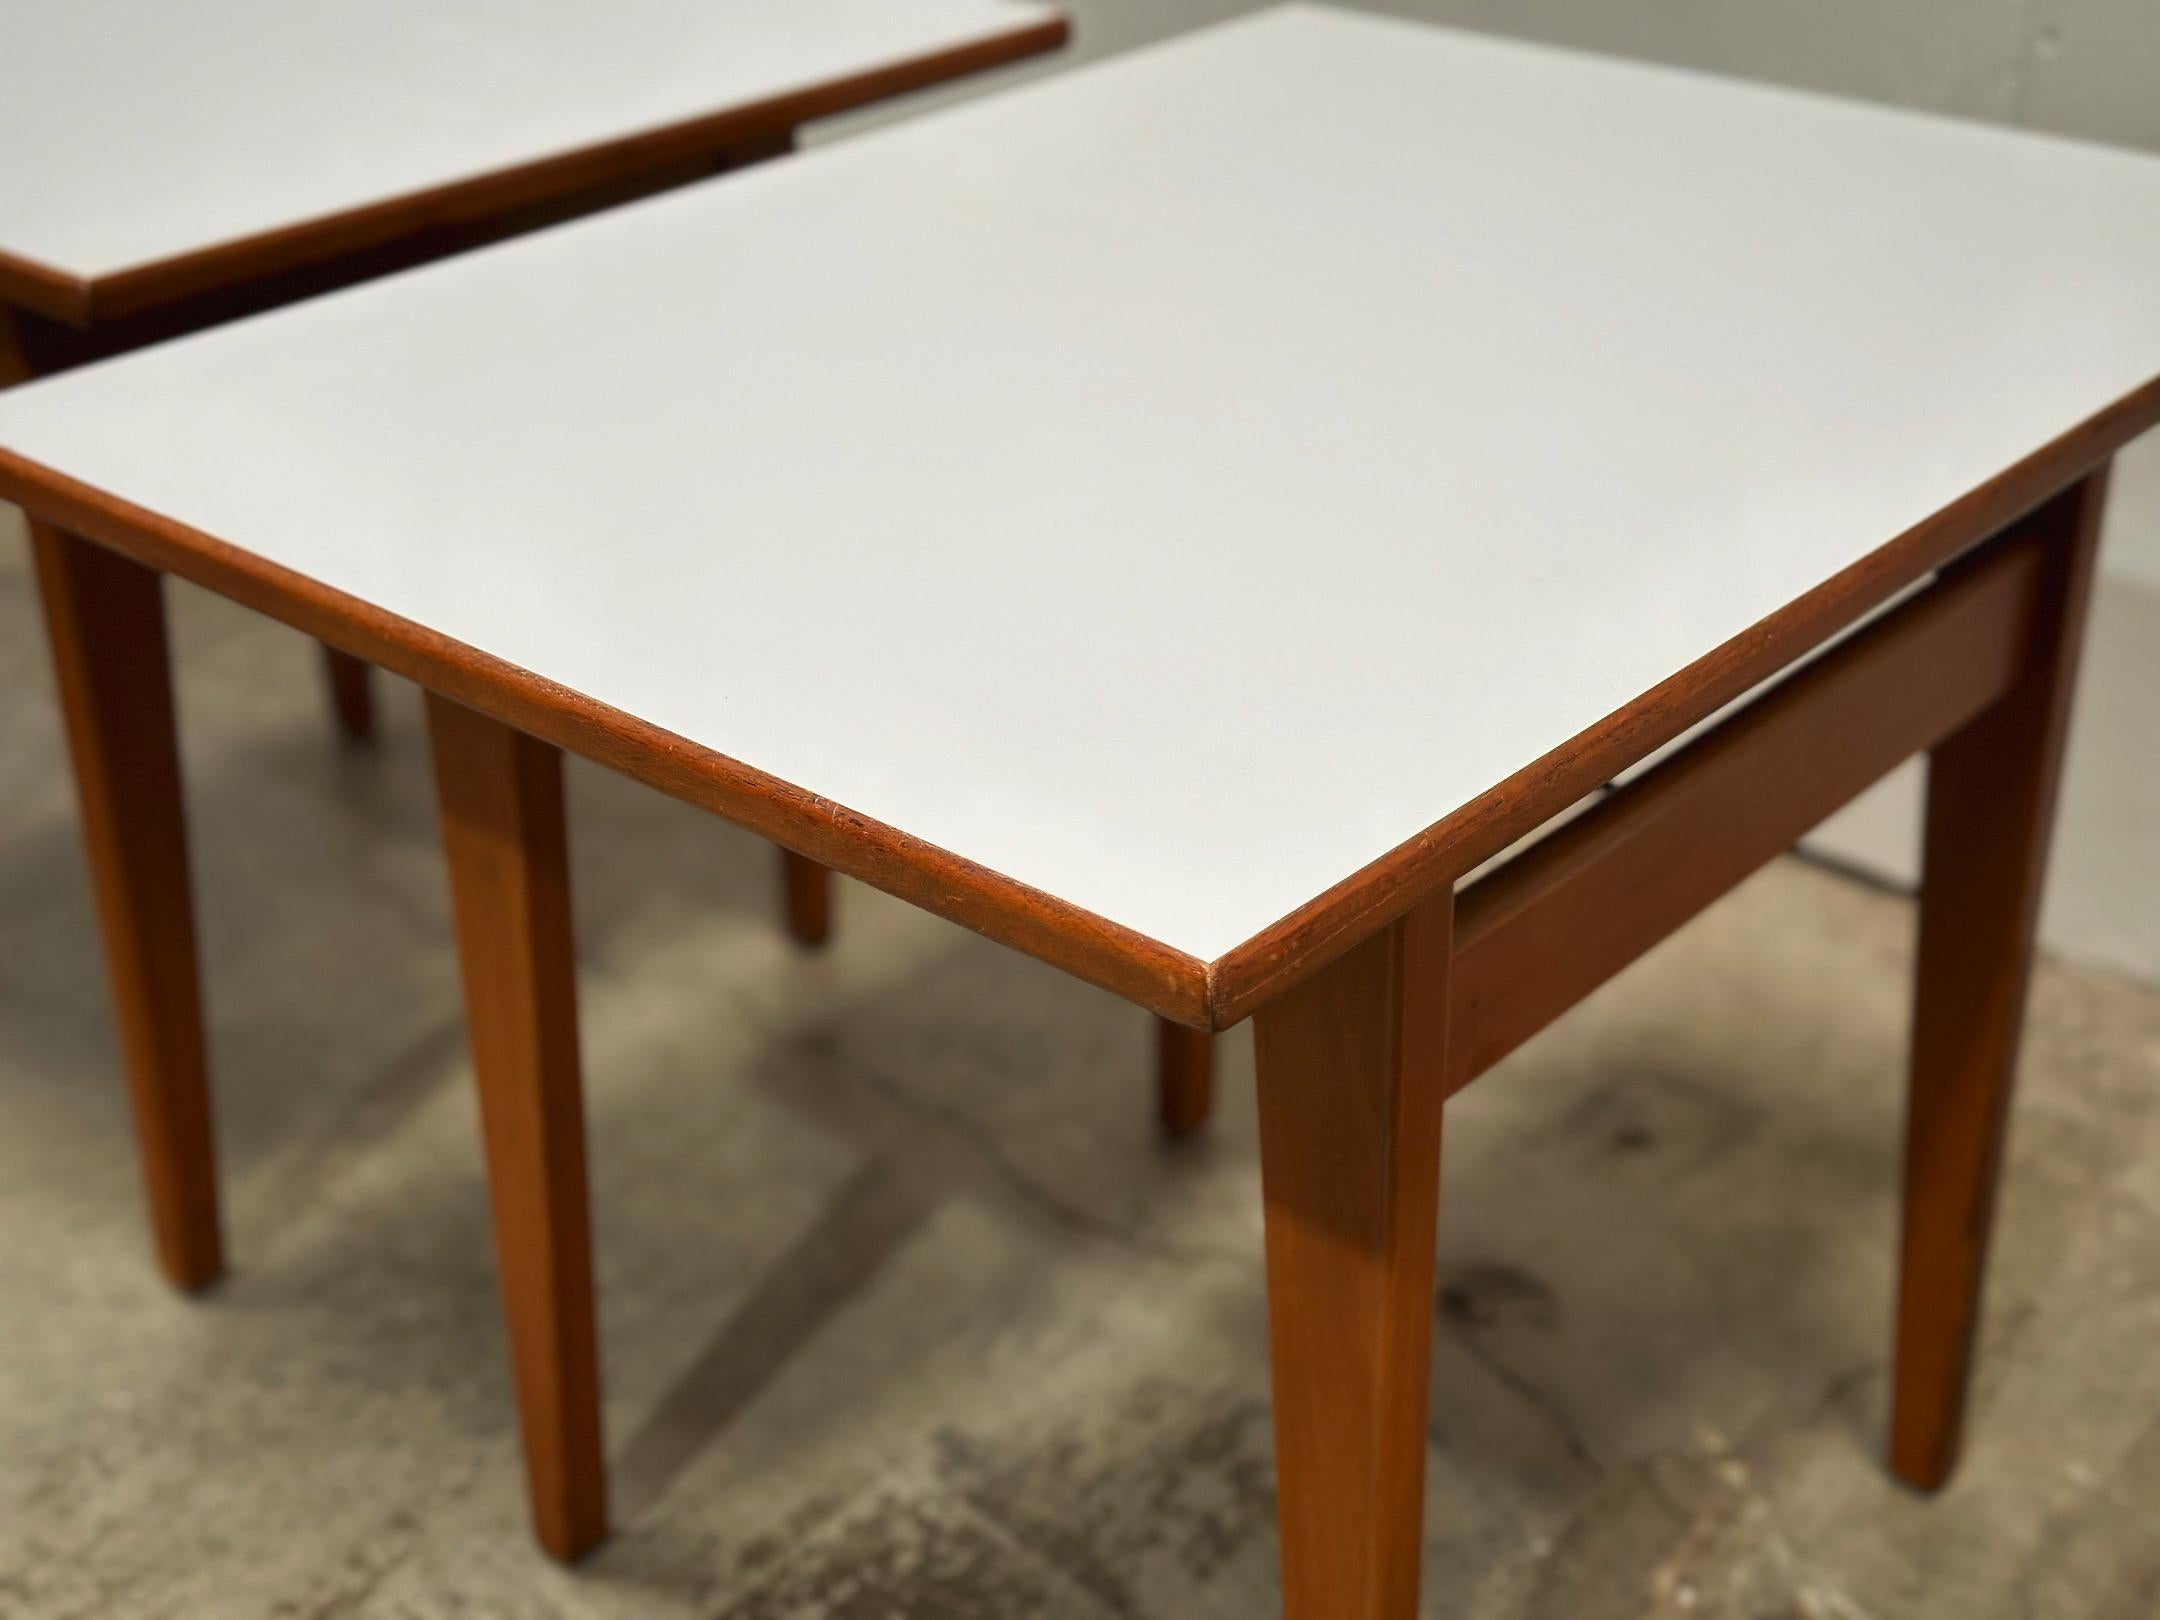 Jens Risom Side Tables - Midcentury Modern - Pair Walnut Formica Floating Top  In Good Condition For Sale In Decatur, GA